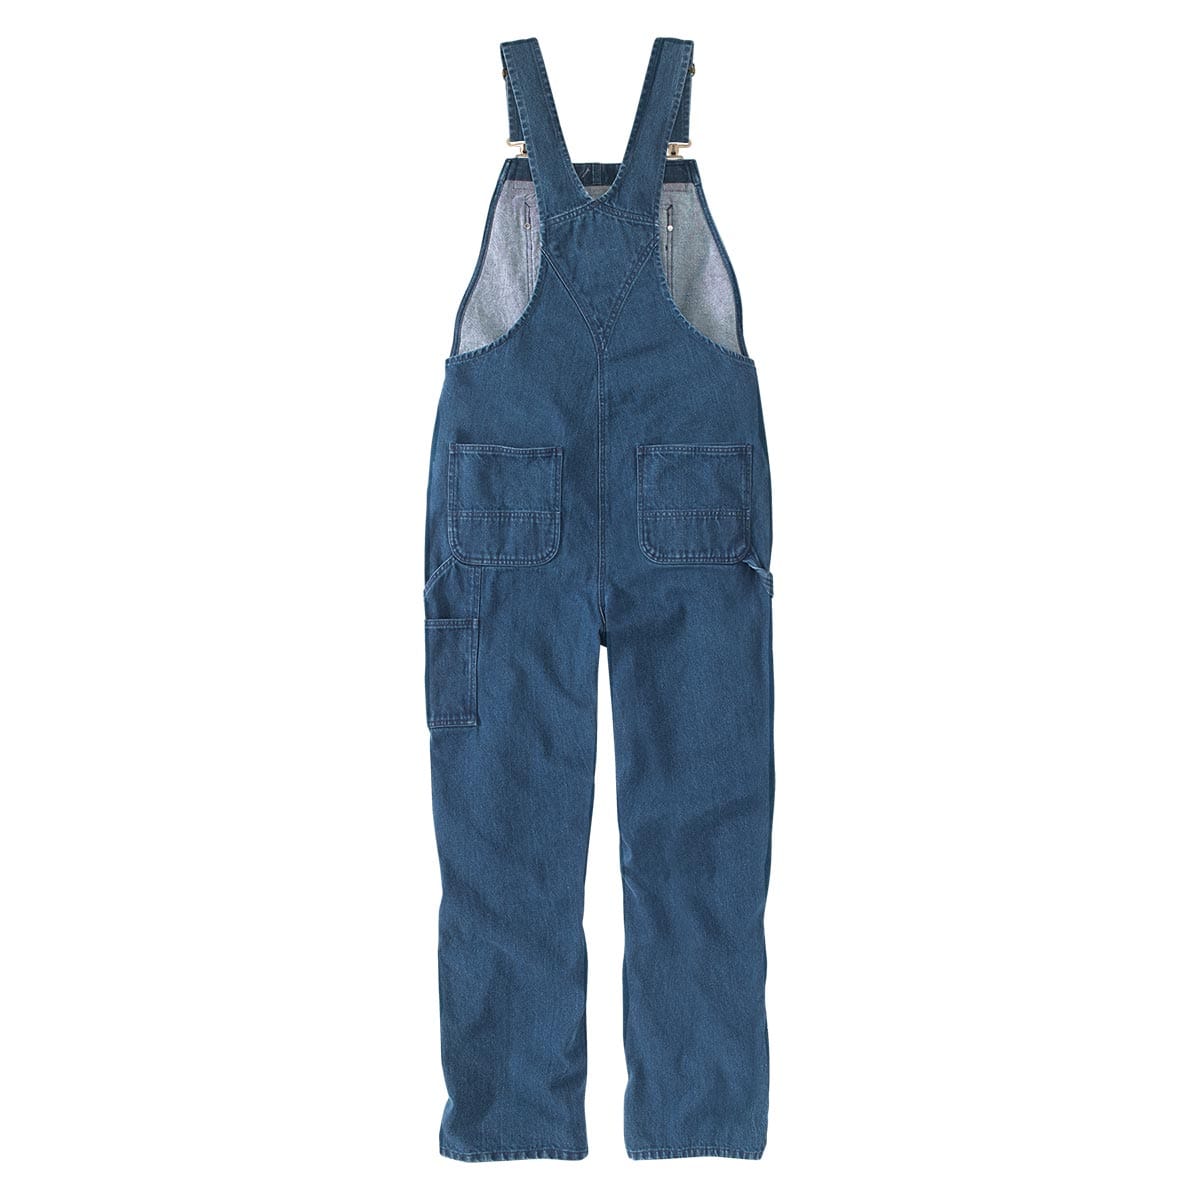 Carhartt Washed Denim Bib Overall — Unlined, 52in. Waist x 32in. Inseam,  Big Style, Model# R07 | Northern Tool